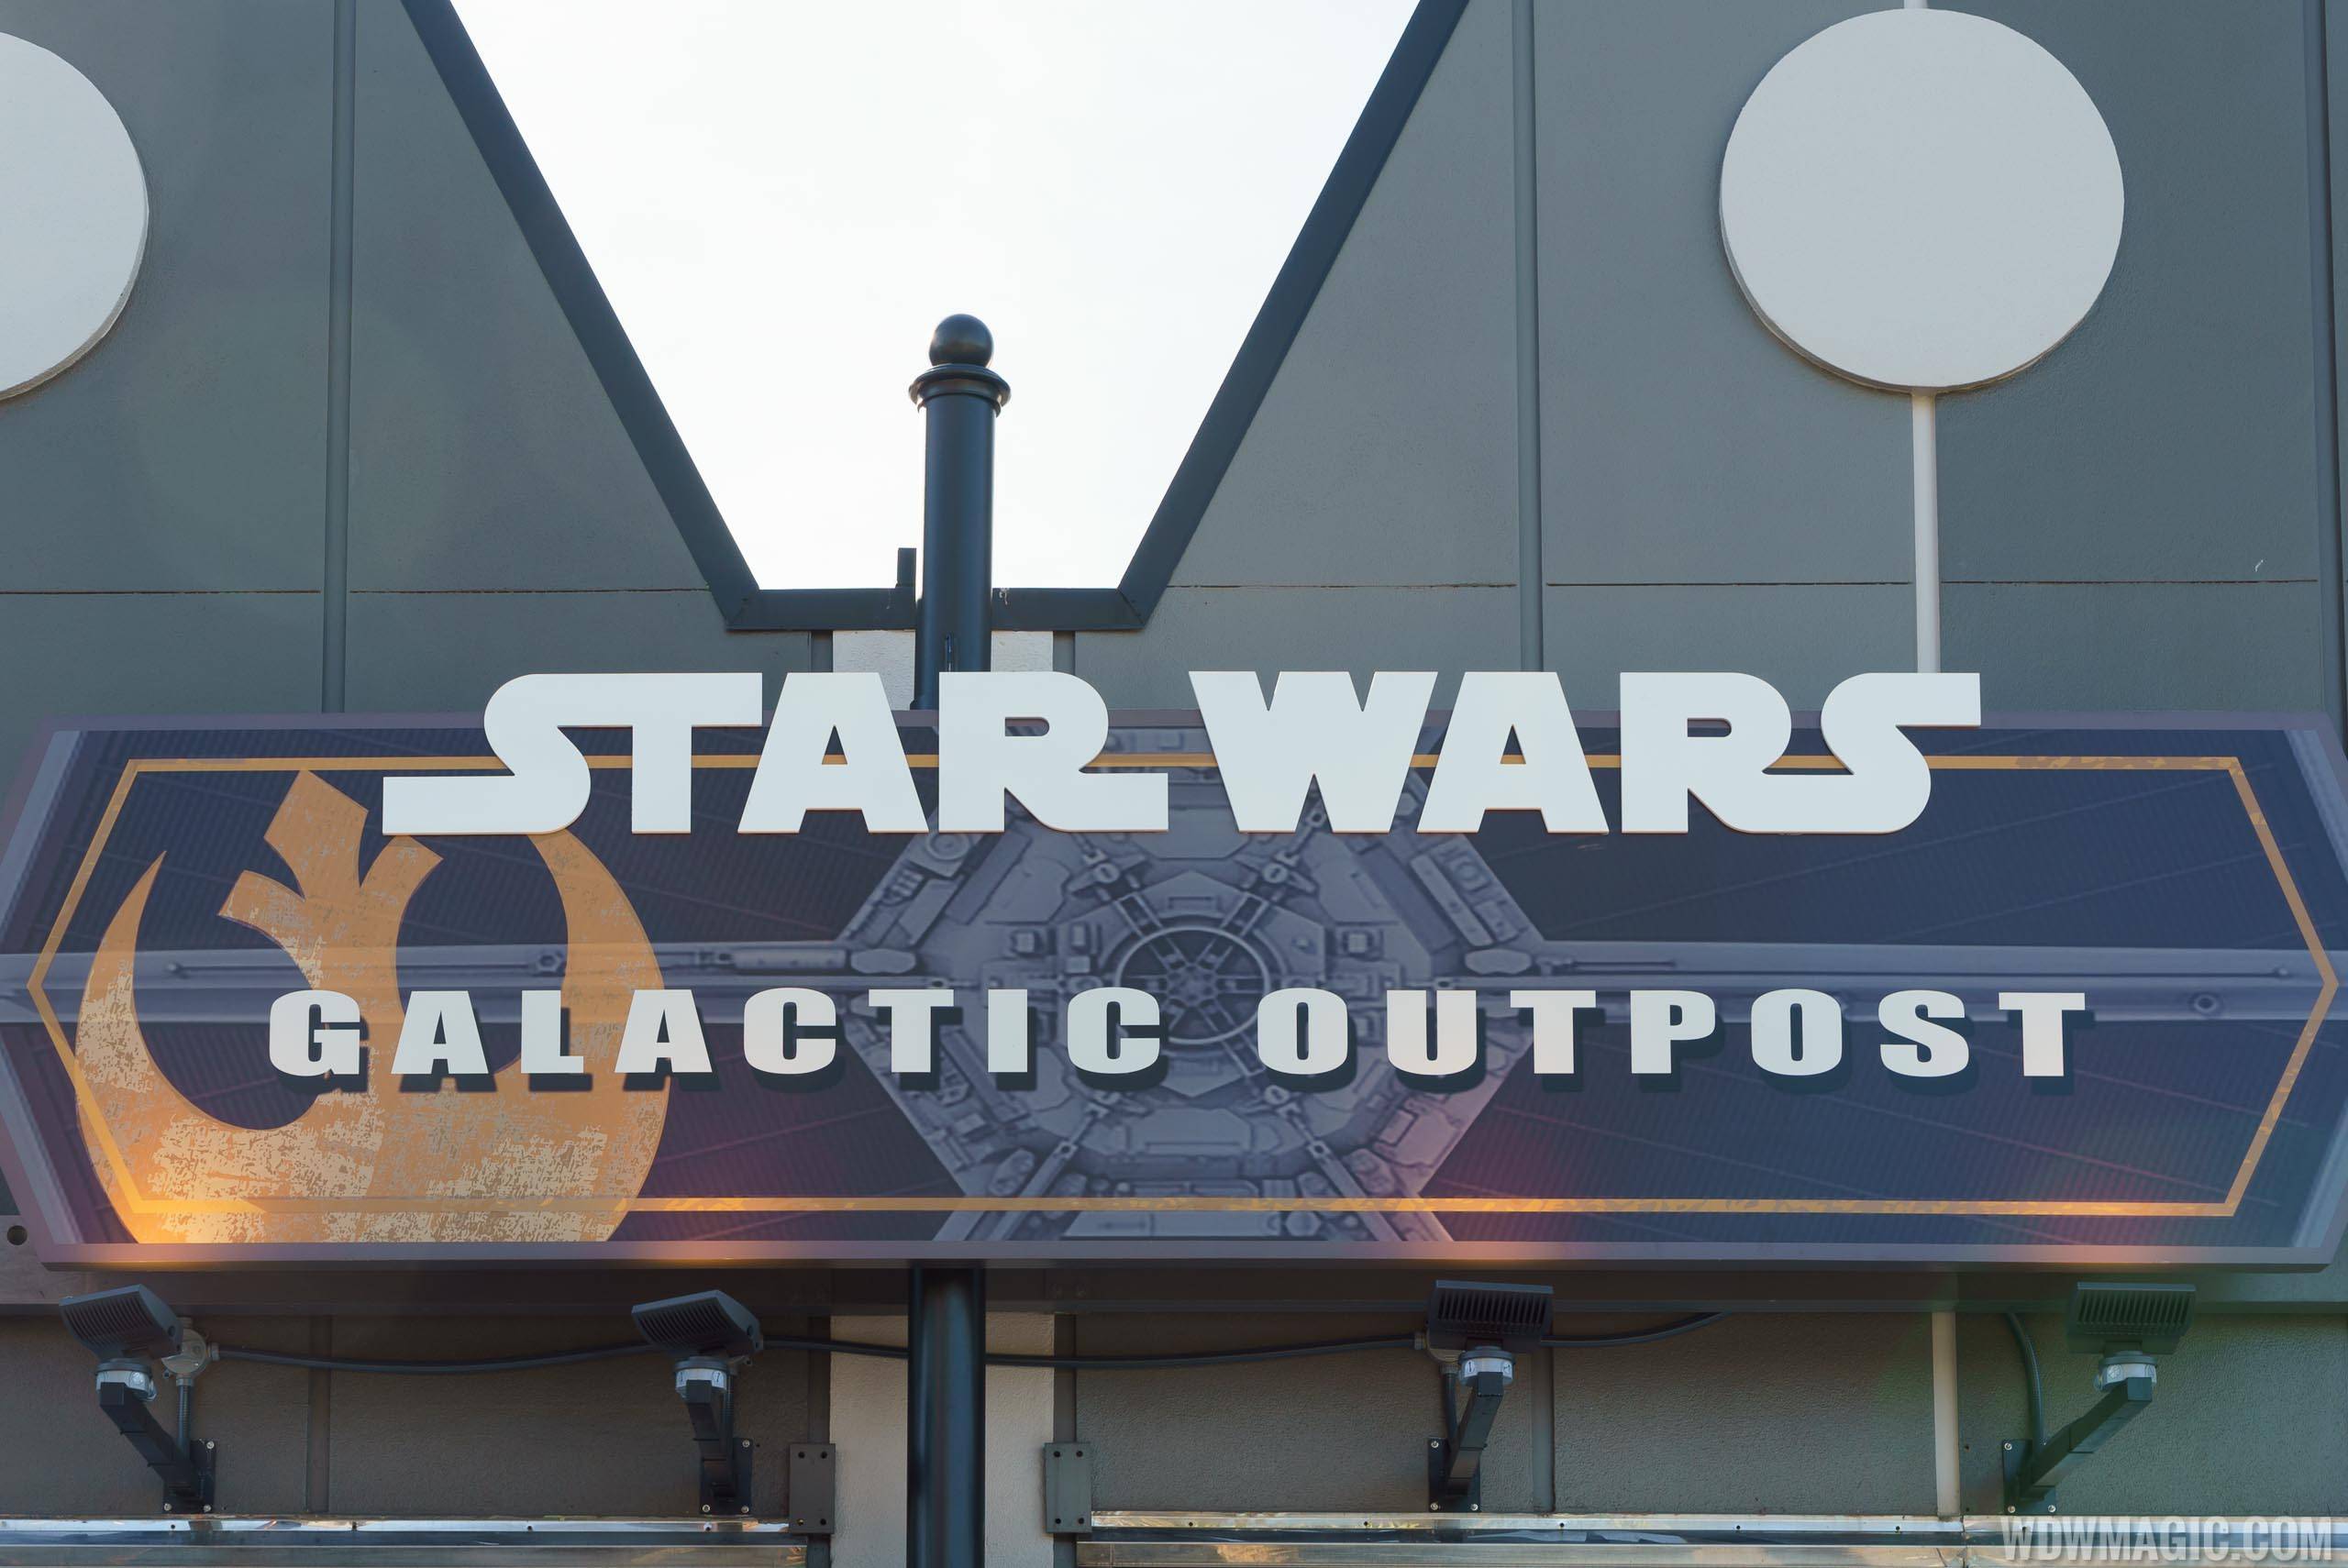 Star Wars Galactic Outpost overview